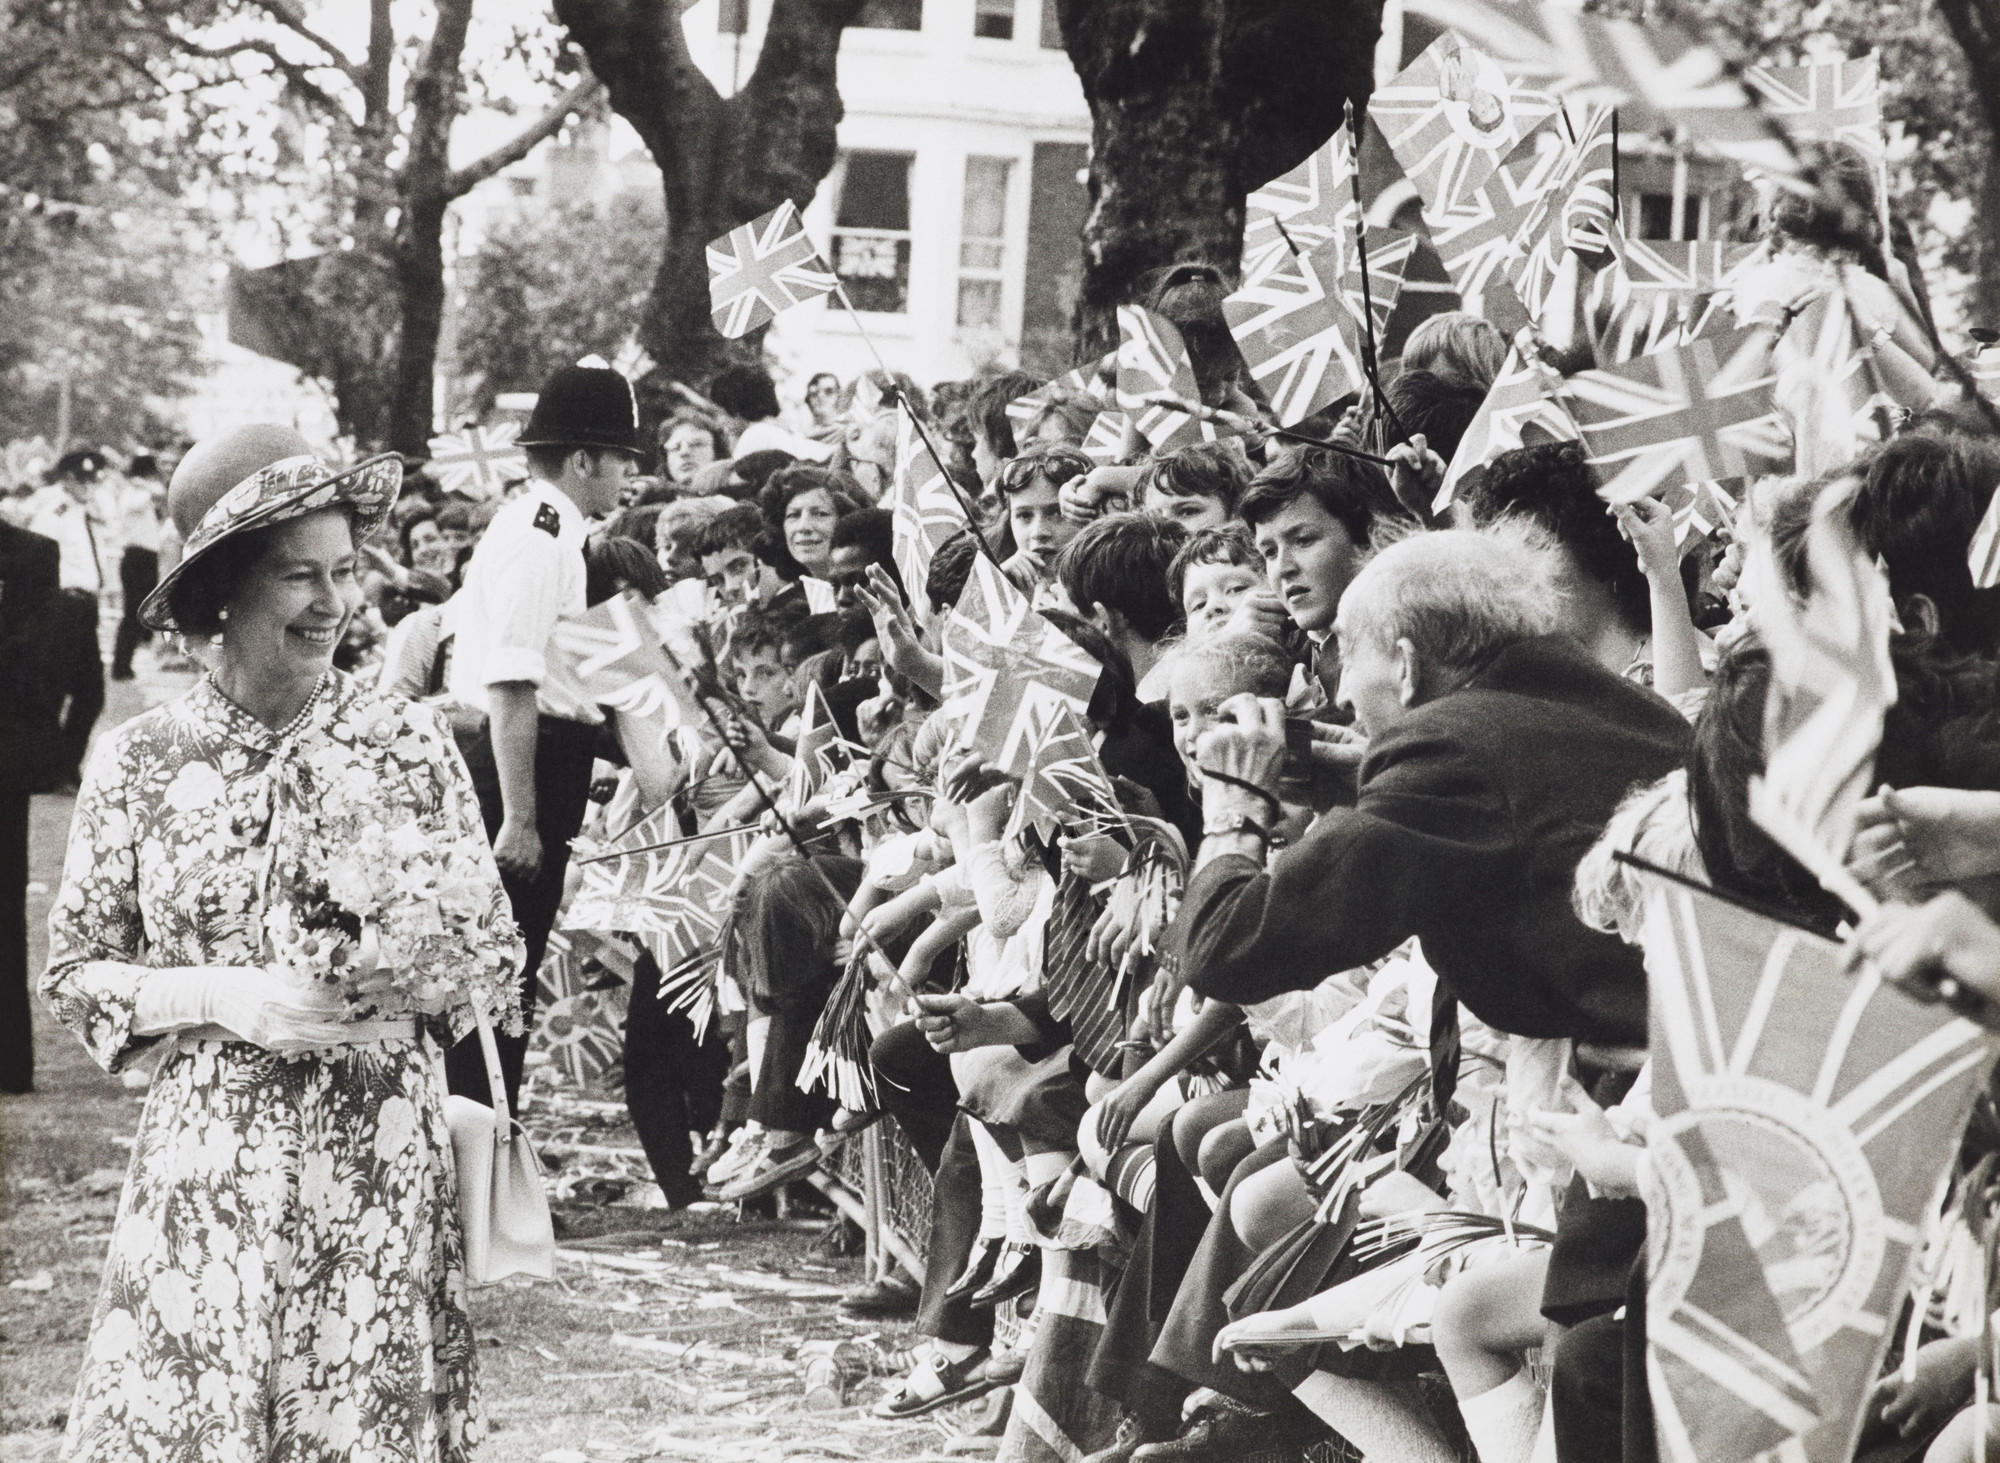 Photograph of HM Queen Elizabeth II (b.1926) visiting Highbury Fields during her Silver Jubilee tour of North London. She is walking to the left wearing a floral dress and holding a bouquet. There is a crowd of well wishers waving Union Jacks to the right